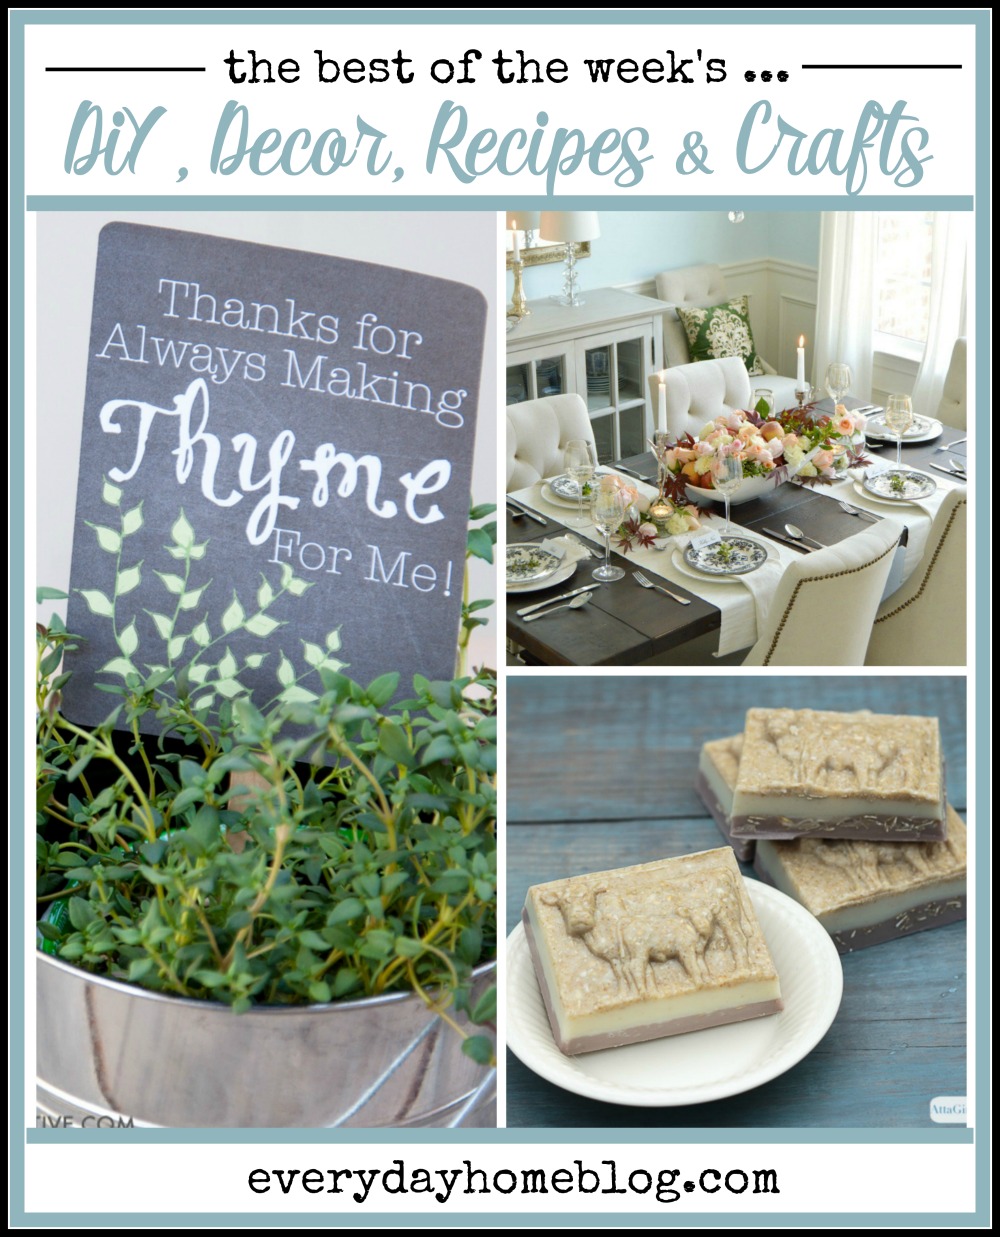 The Best of DIY, Decor, Recipes, Crafts | The Everyday Home Blog